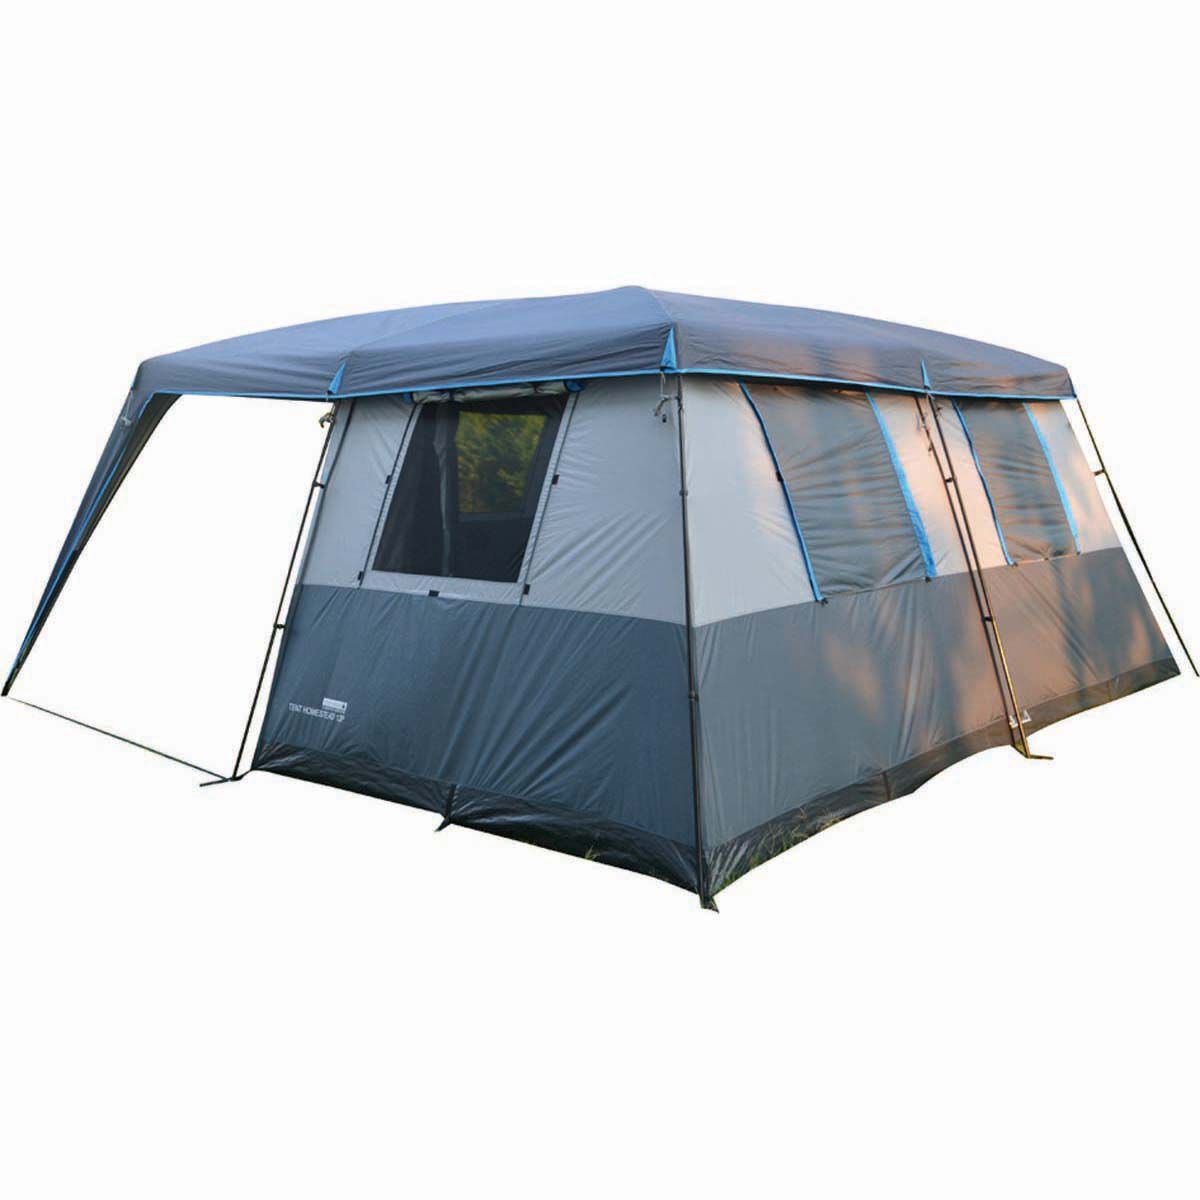 Wanderer Homestead Dome Tent 12 Person